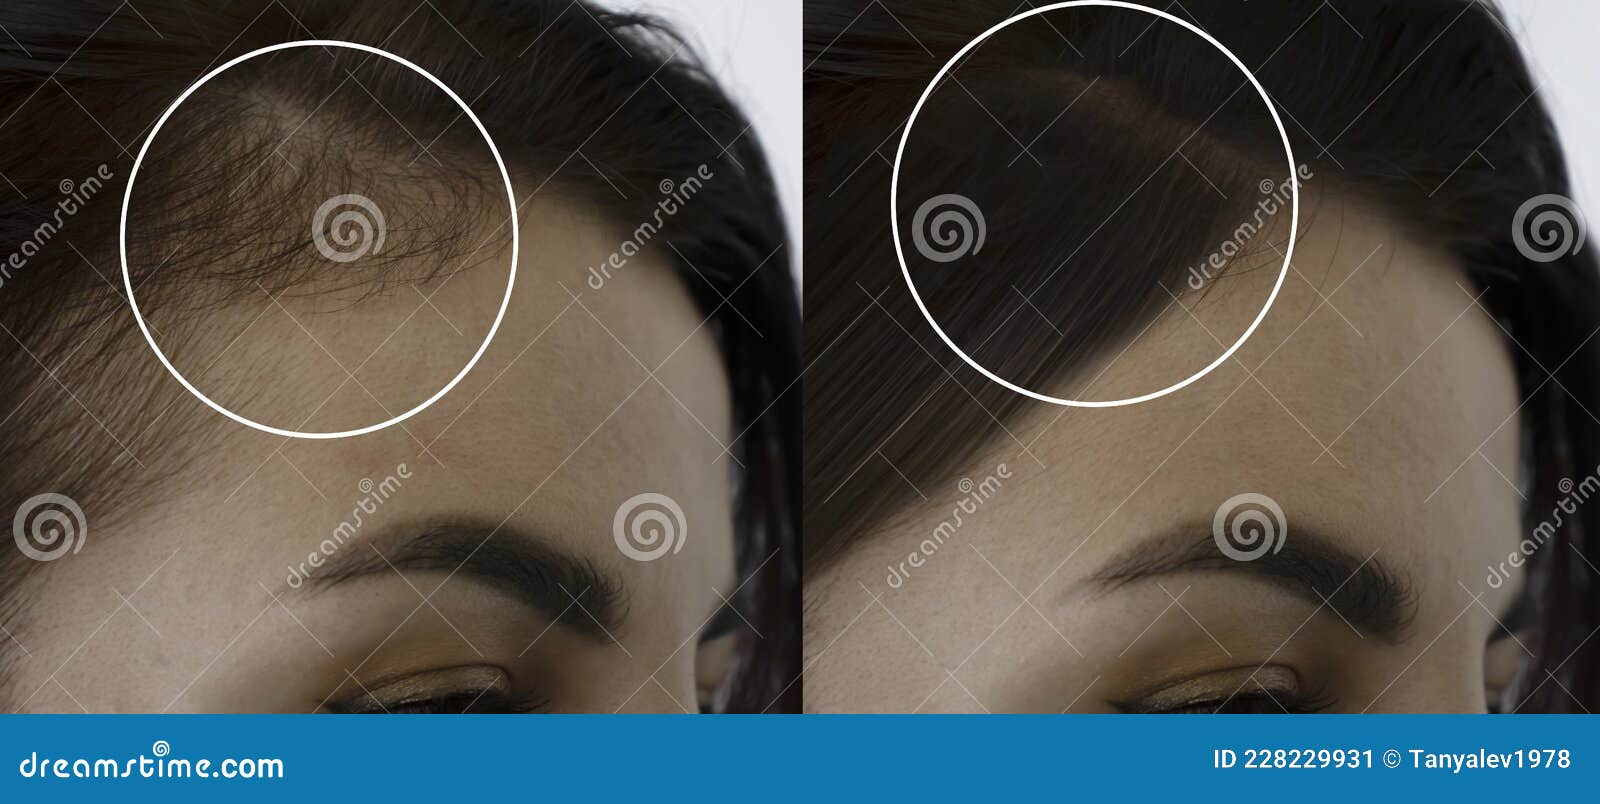 woman head baldness before and after treatment alopecia